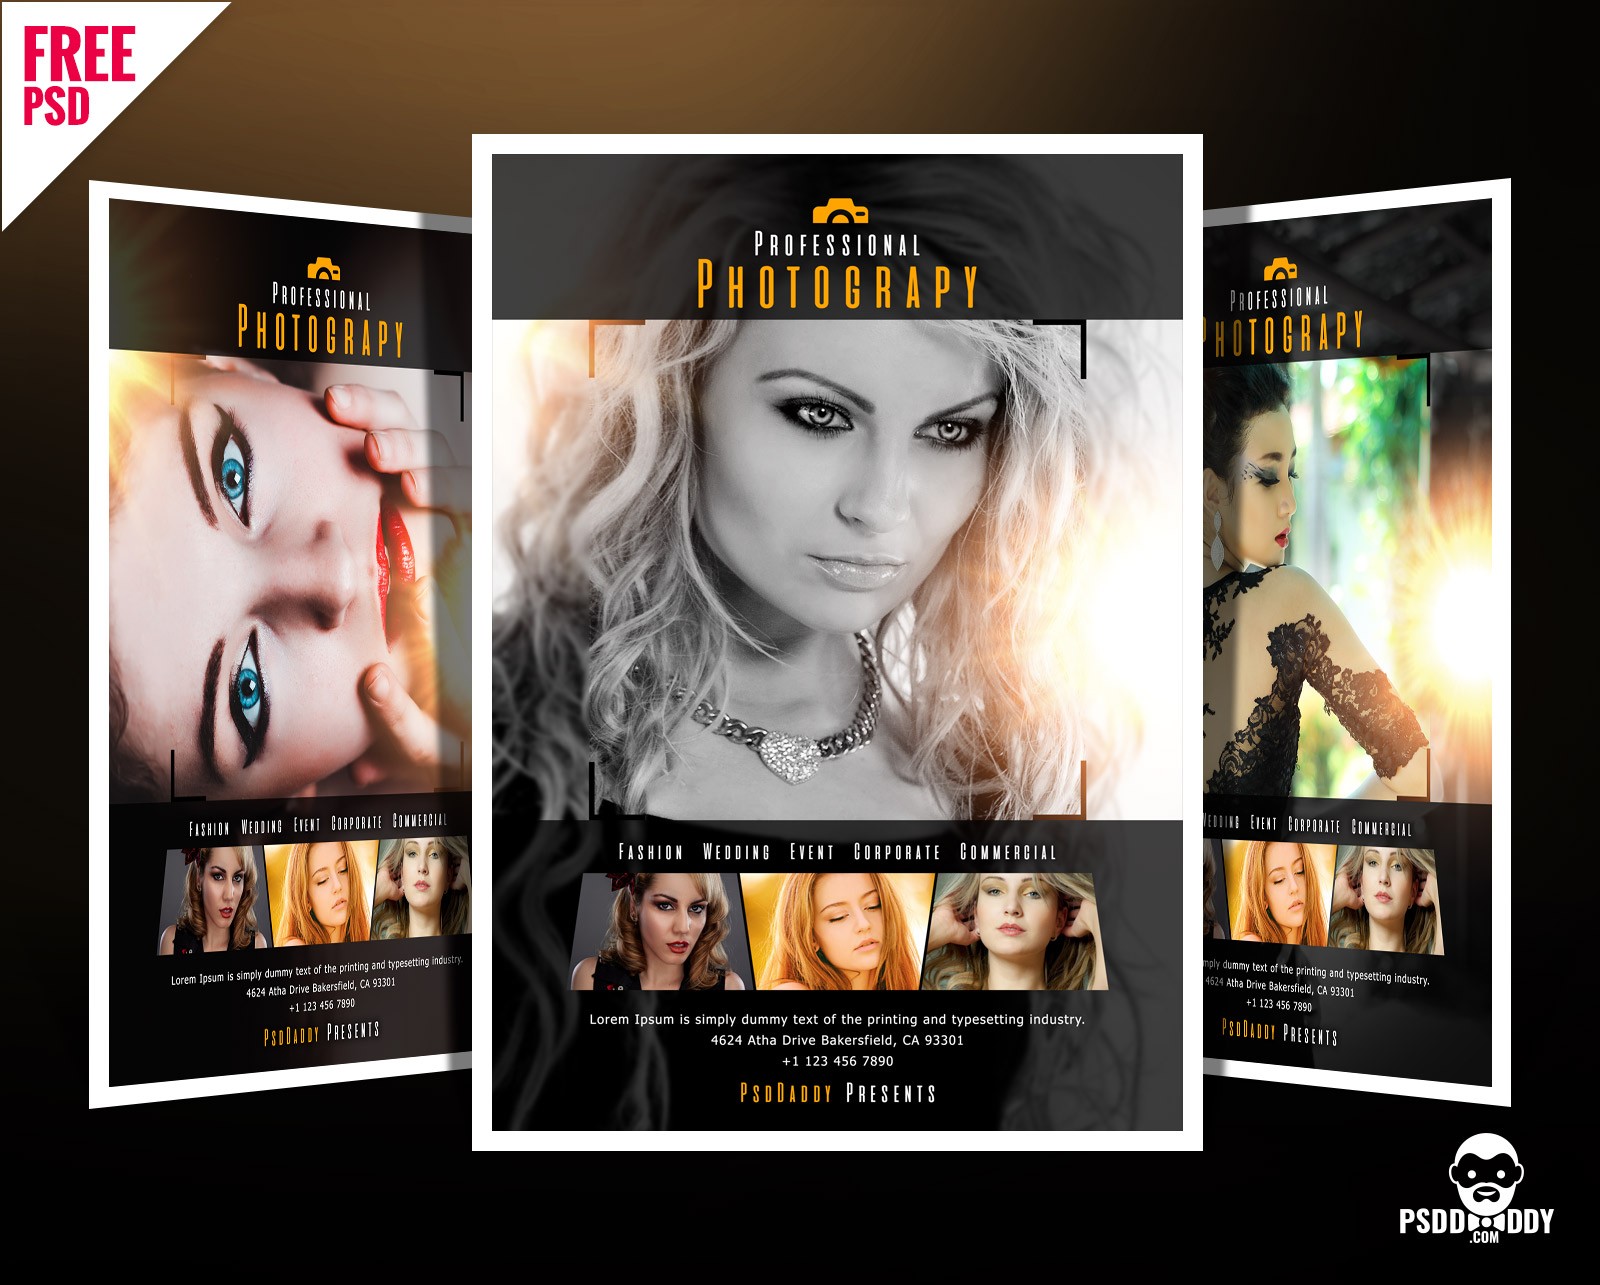 Download Professional Photography Flyer PSD PsdDaddy Com Document Advertising